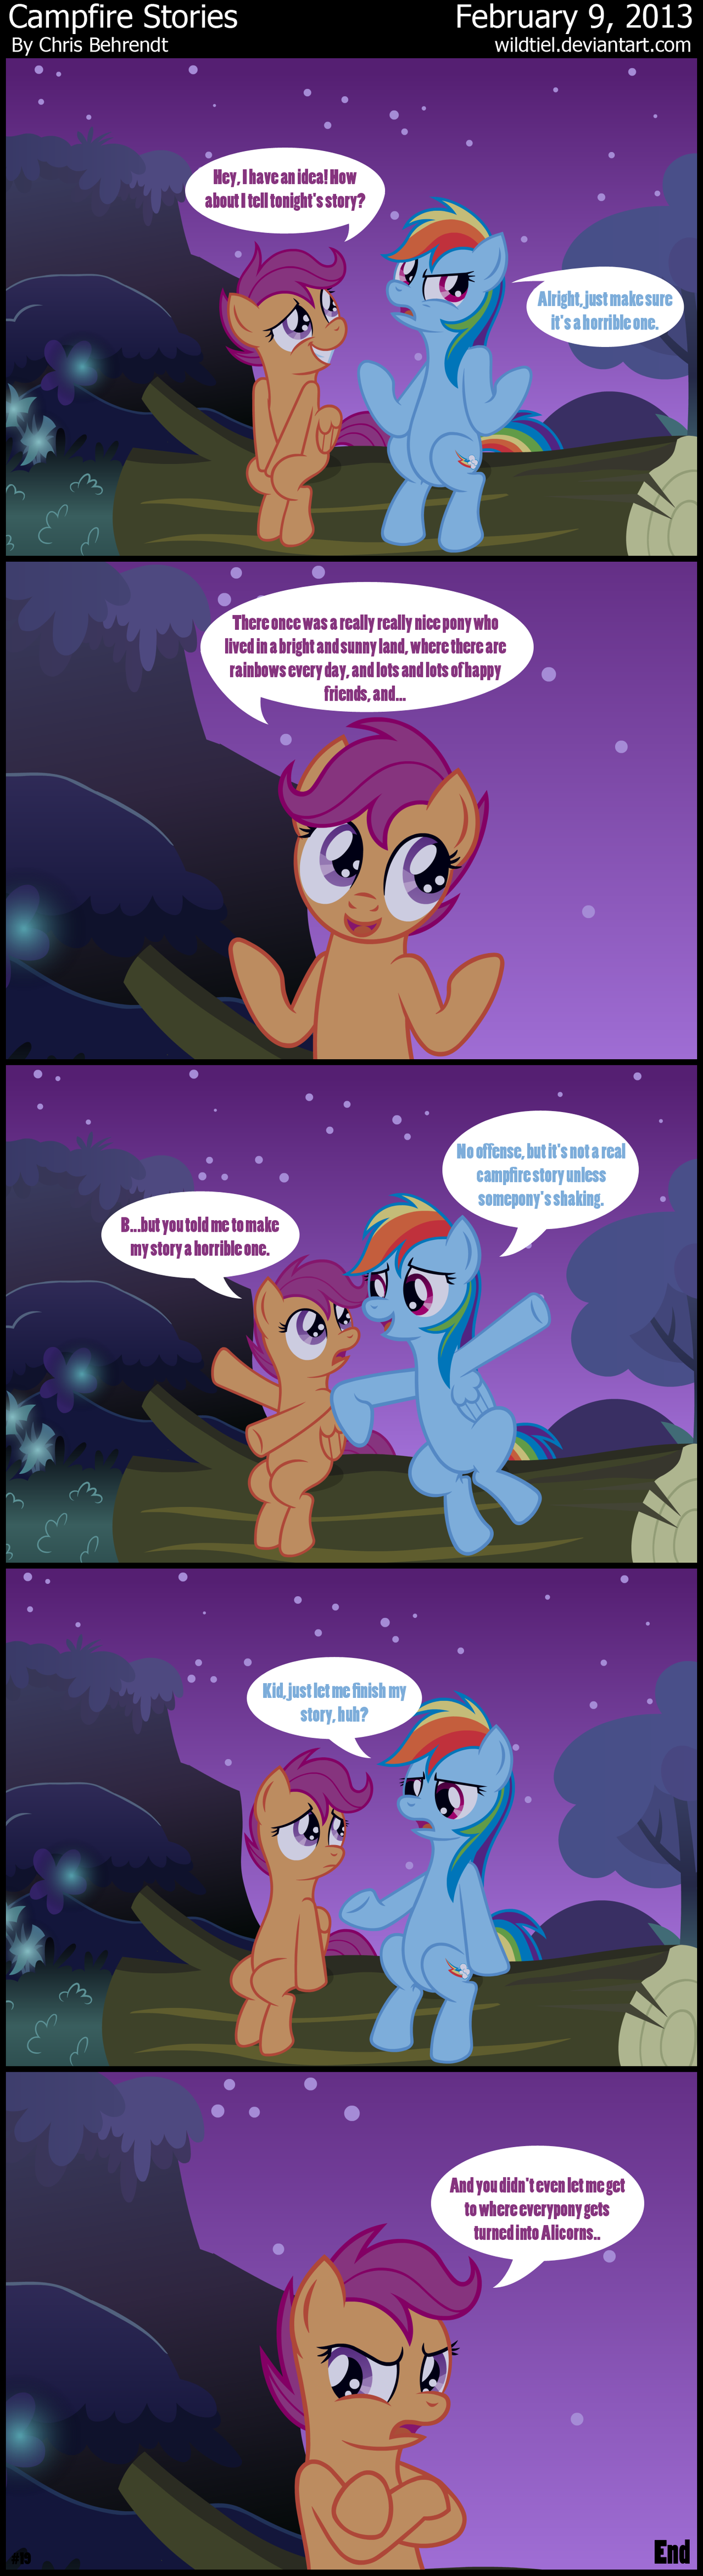 campfire_stories_by_wildtiel-d5ub2n9.png